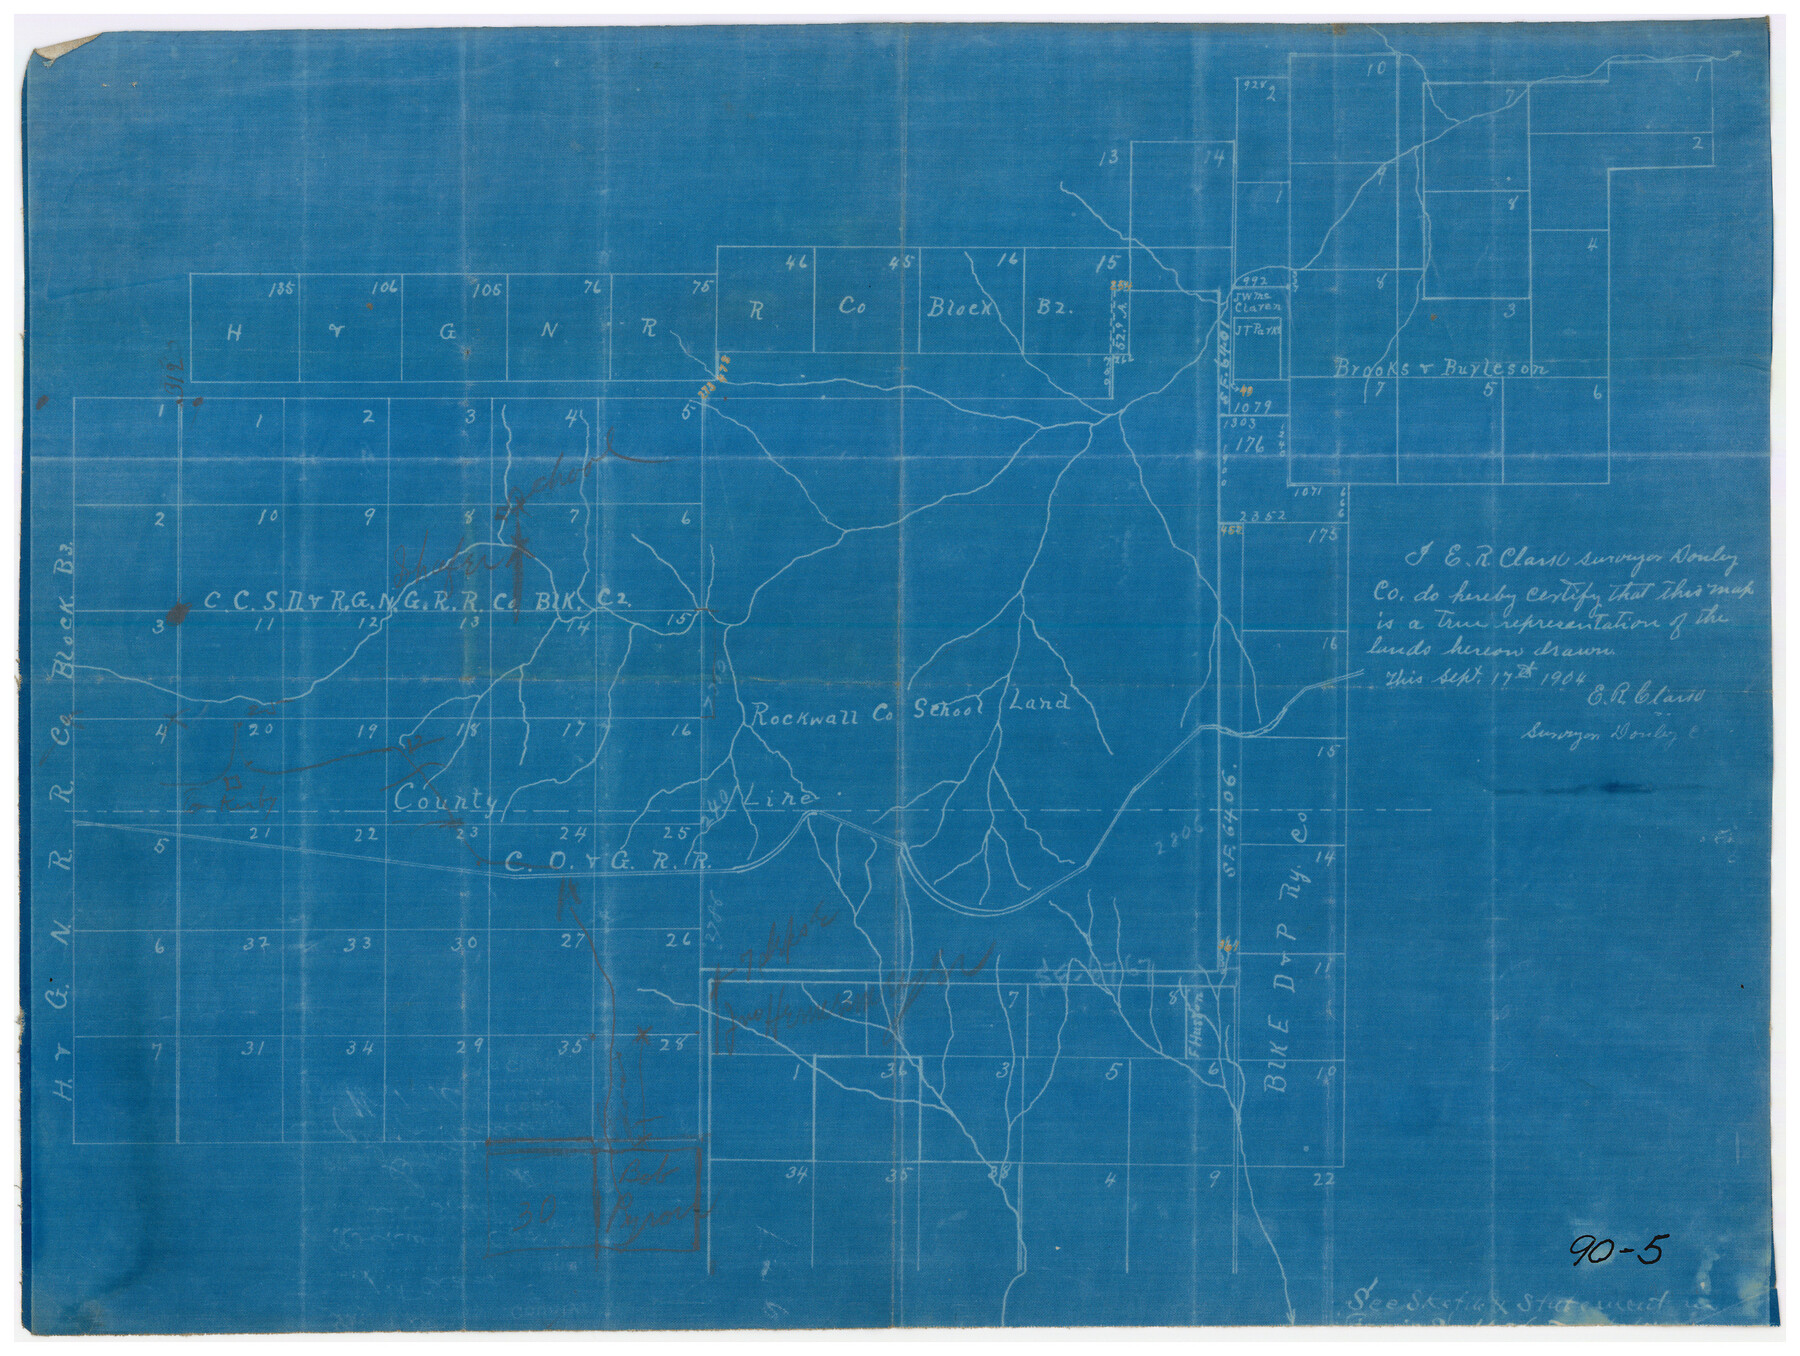 90759, [Rockwall County School Land and adjacent Blocks], Twichell Survey Records